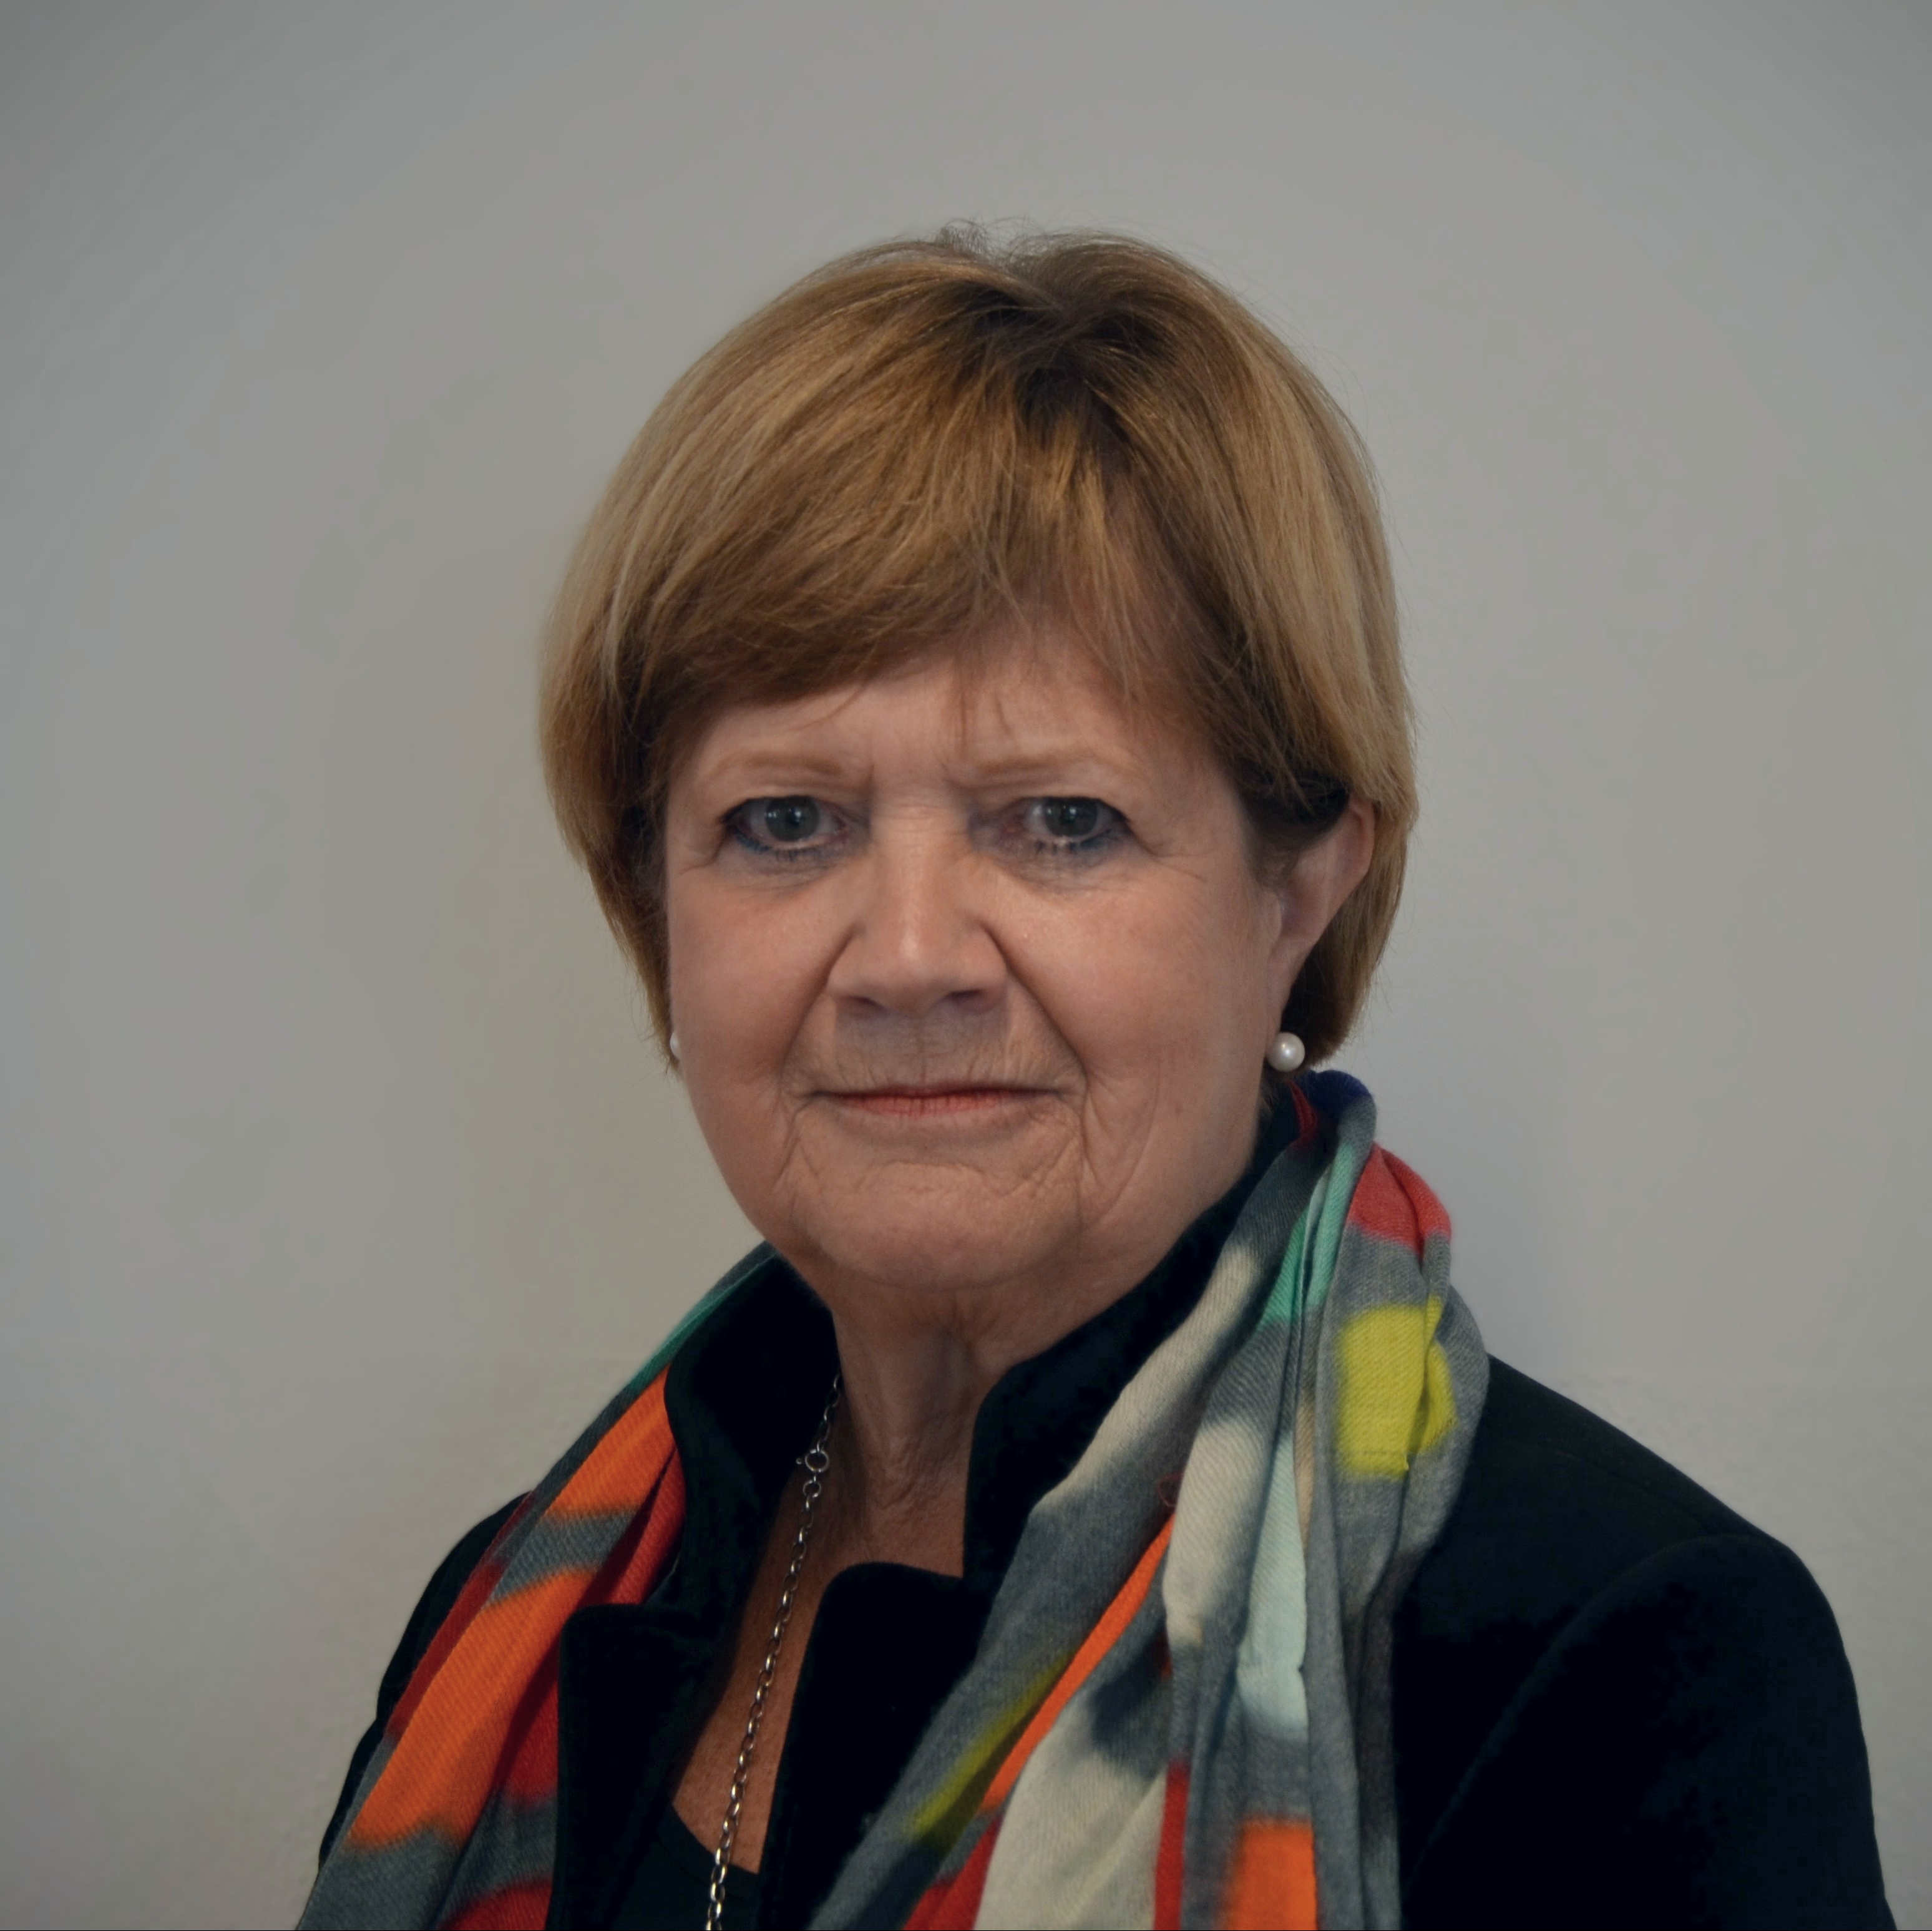 The Right Honourable Baroness Heather Hallett DBE, Inquiry Chair